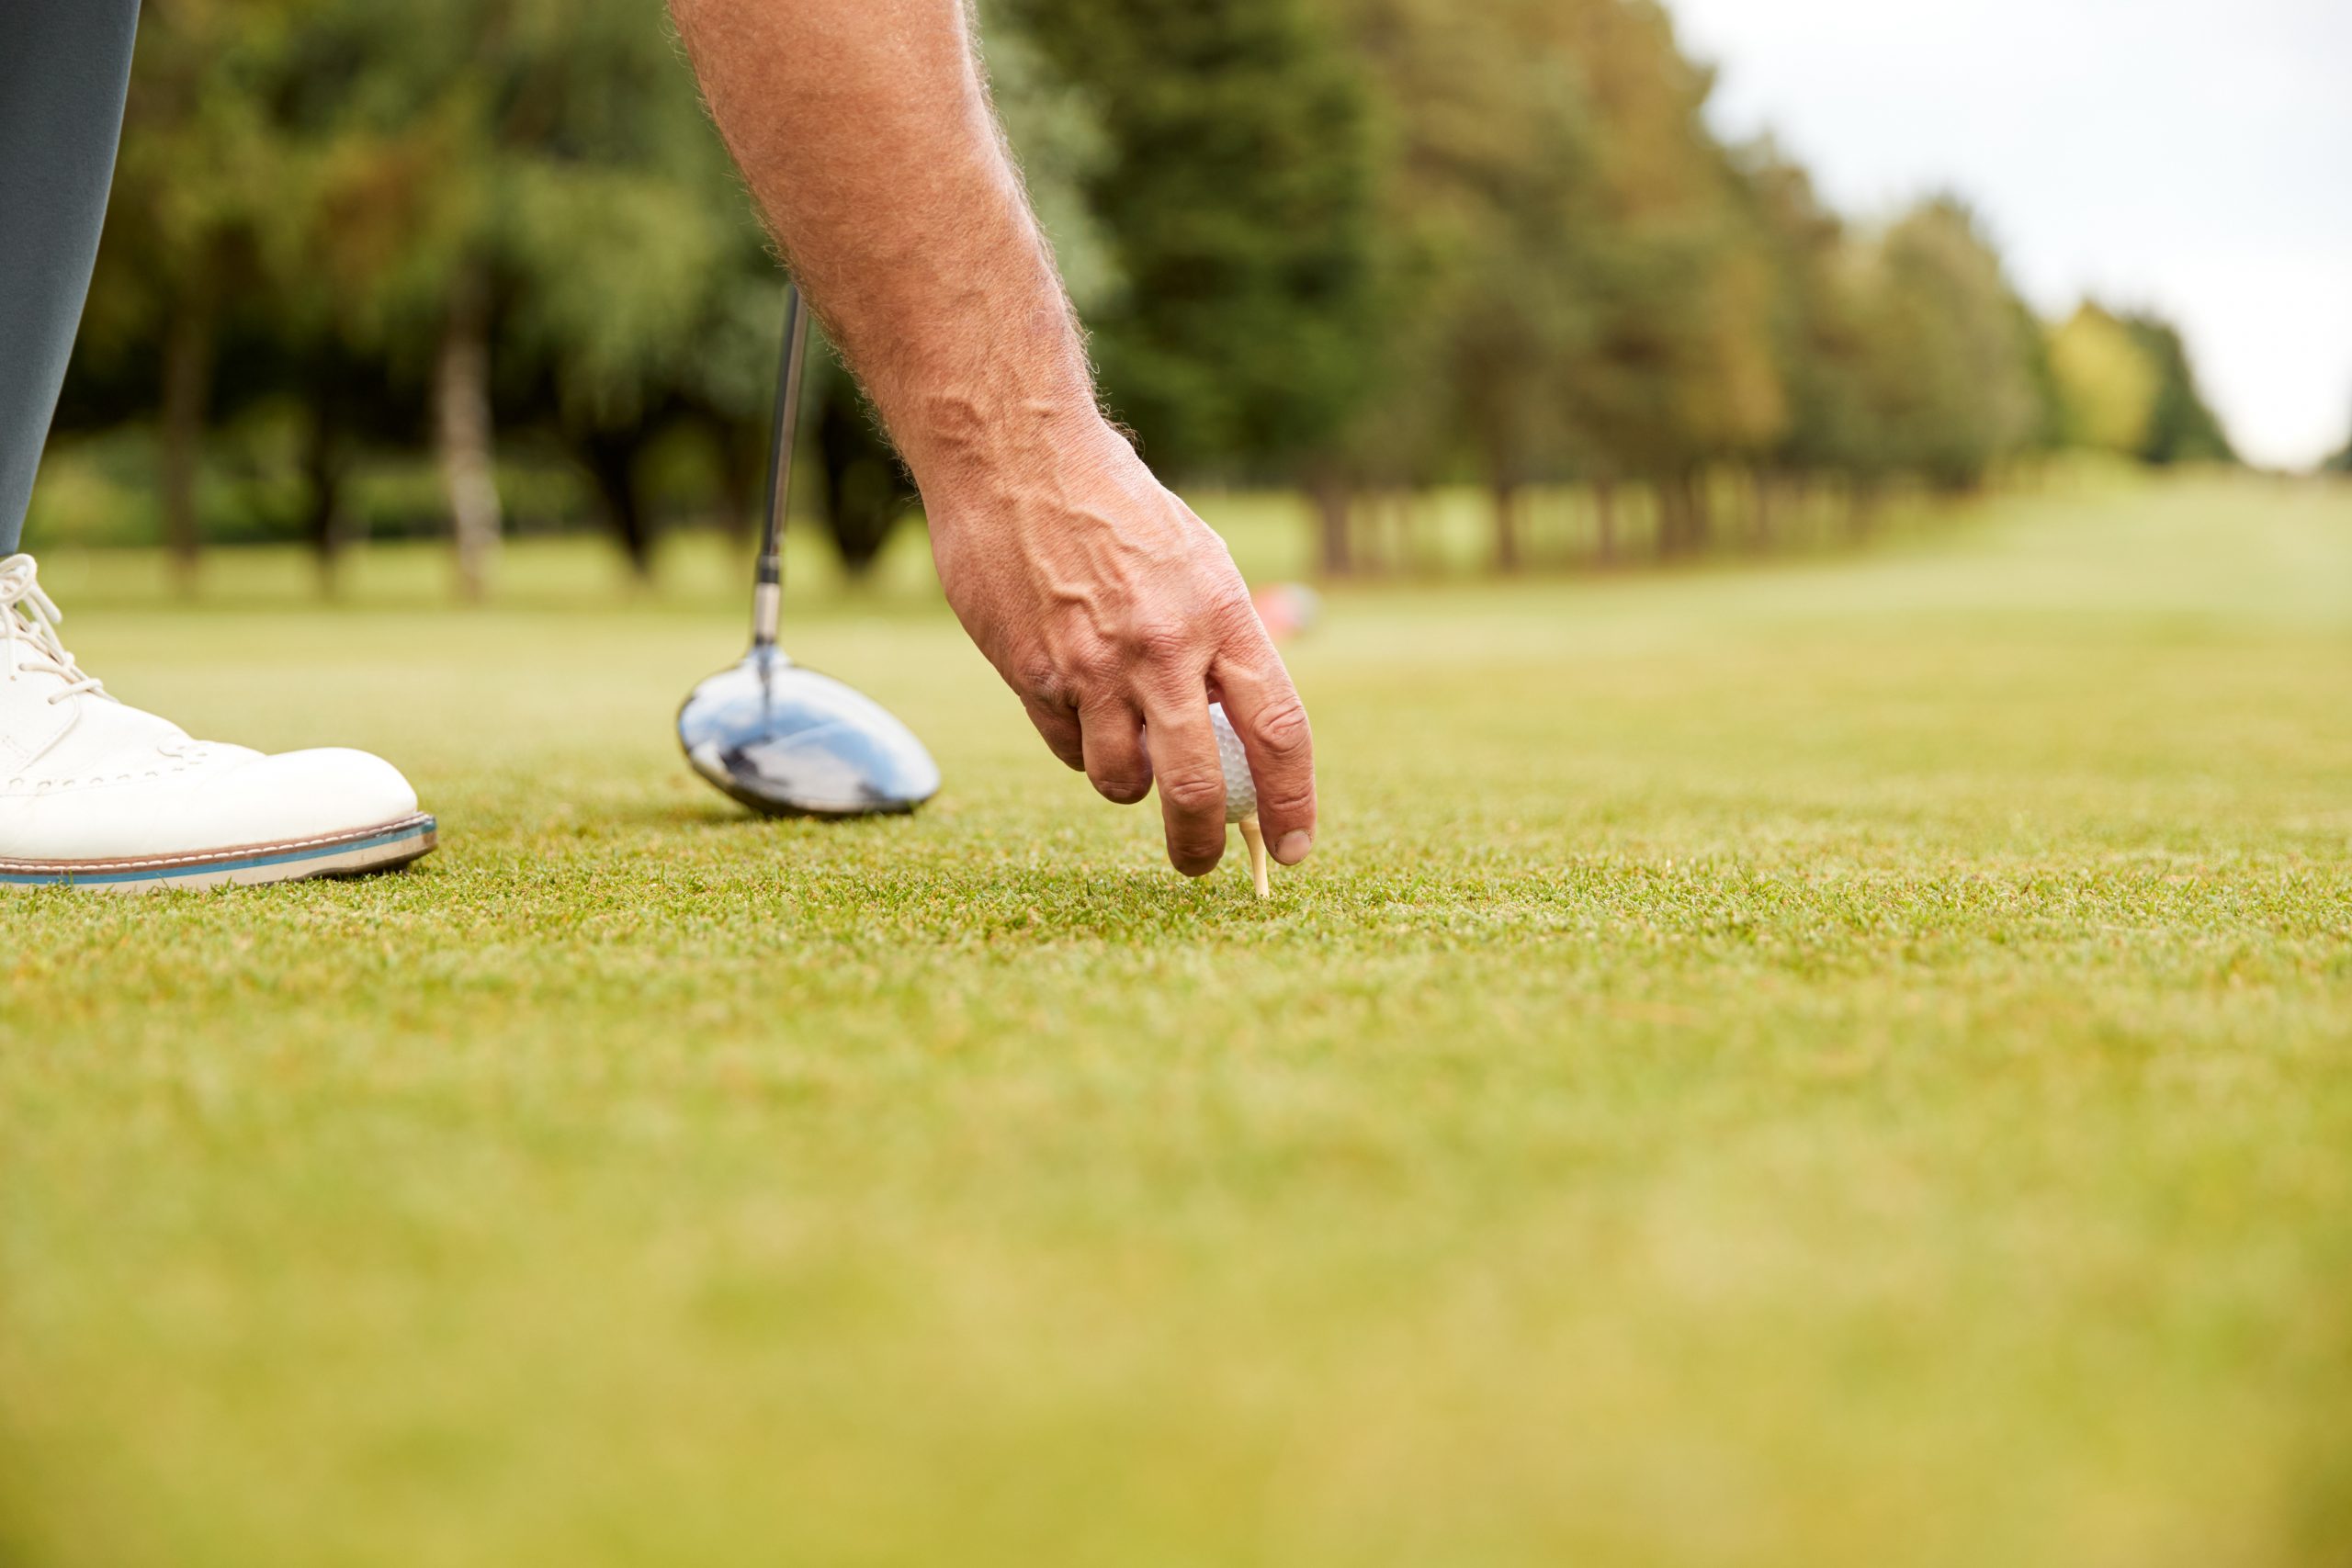 Tee Time Etiquette: What You Need to Know